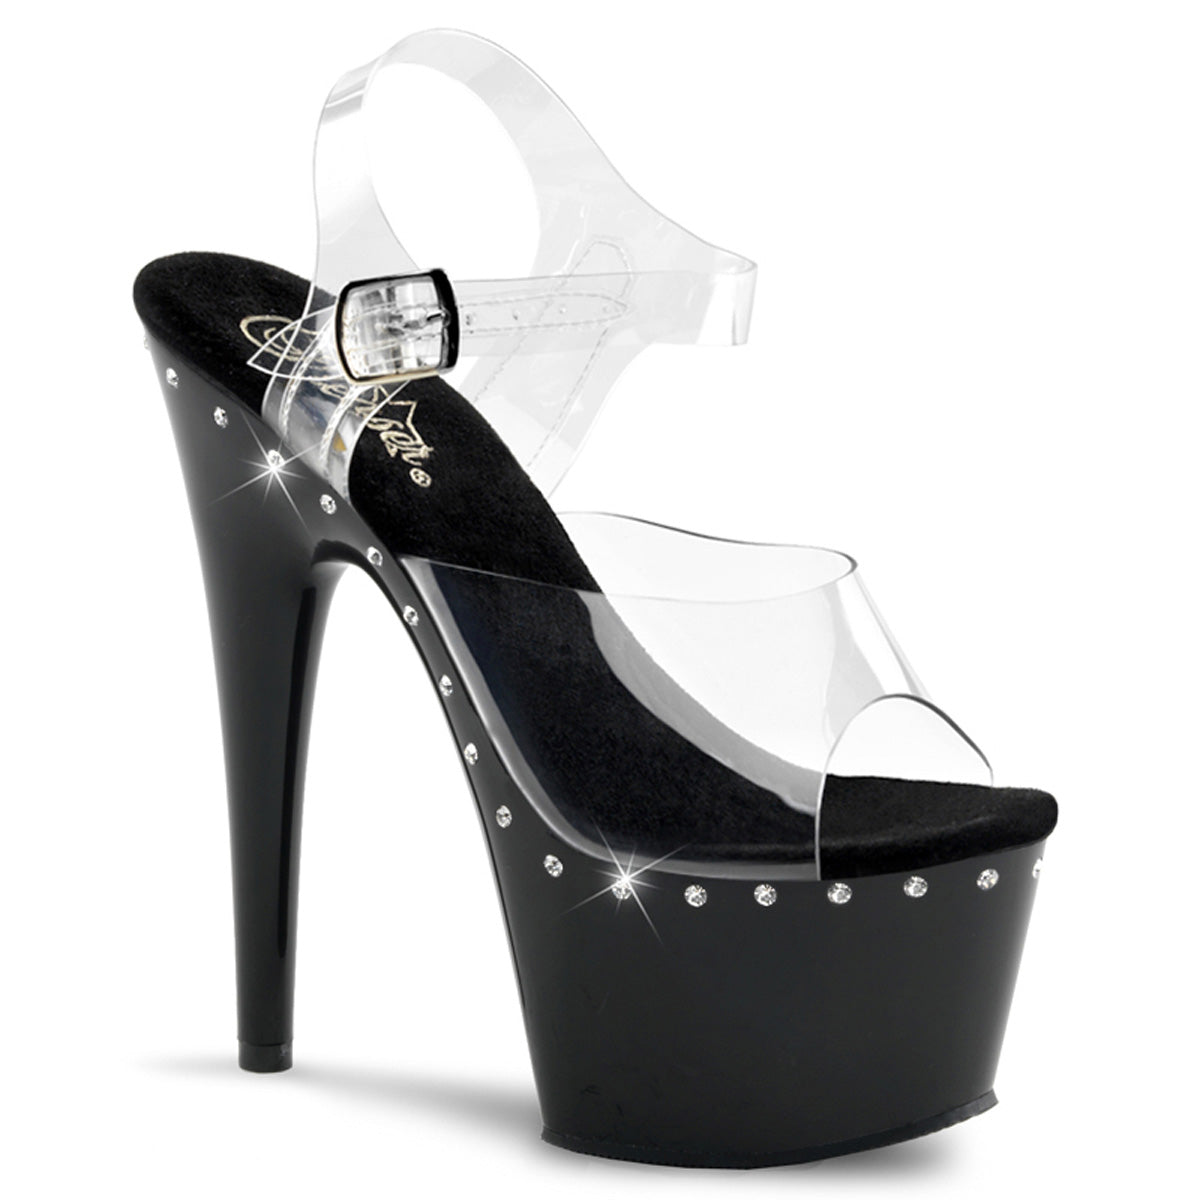 ADORE-708LS 7" Heel Clear and Black Pole Dancing Shoes